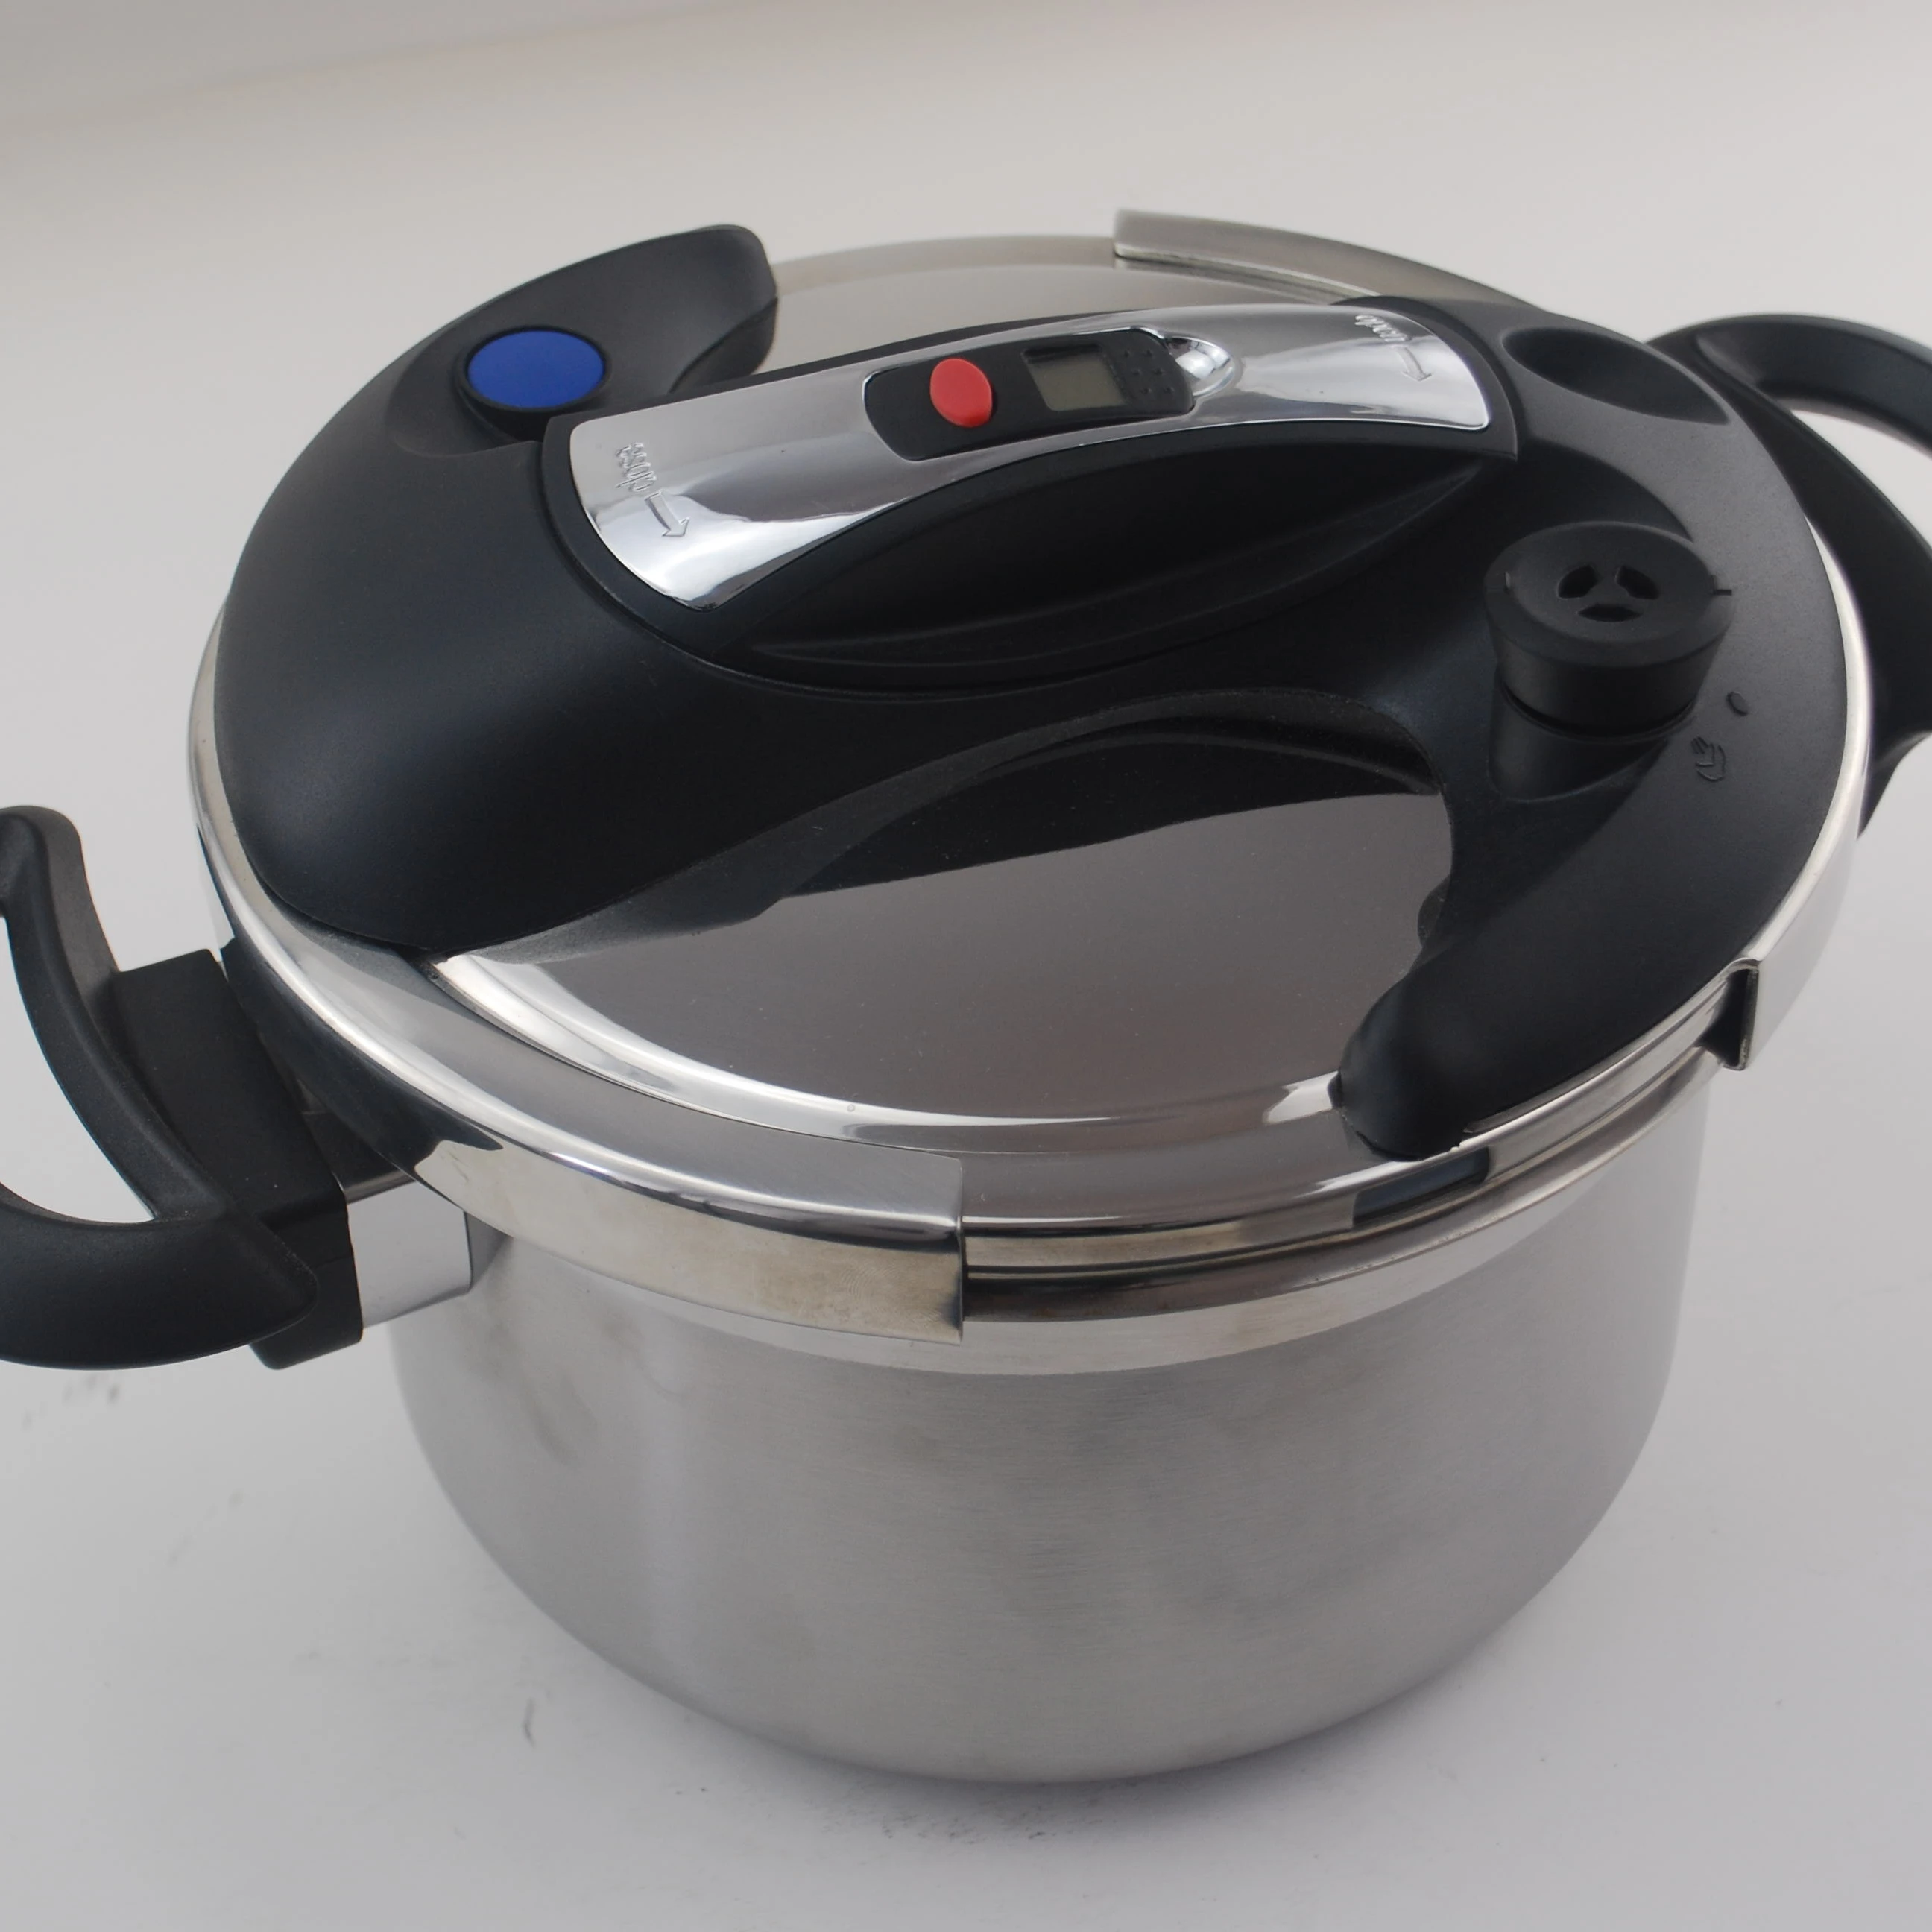 Fagor LUX Multi Cooker Stainless Steel - Wisemen Trading and Supply